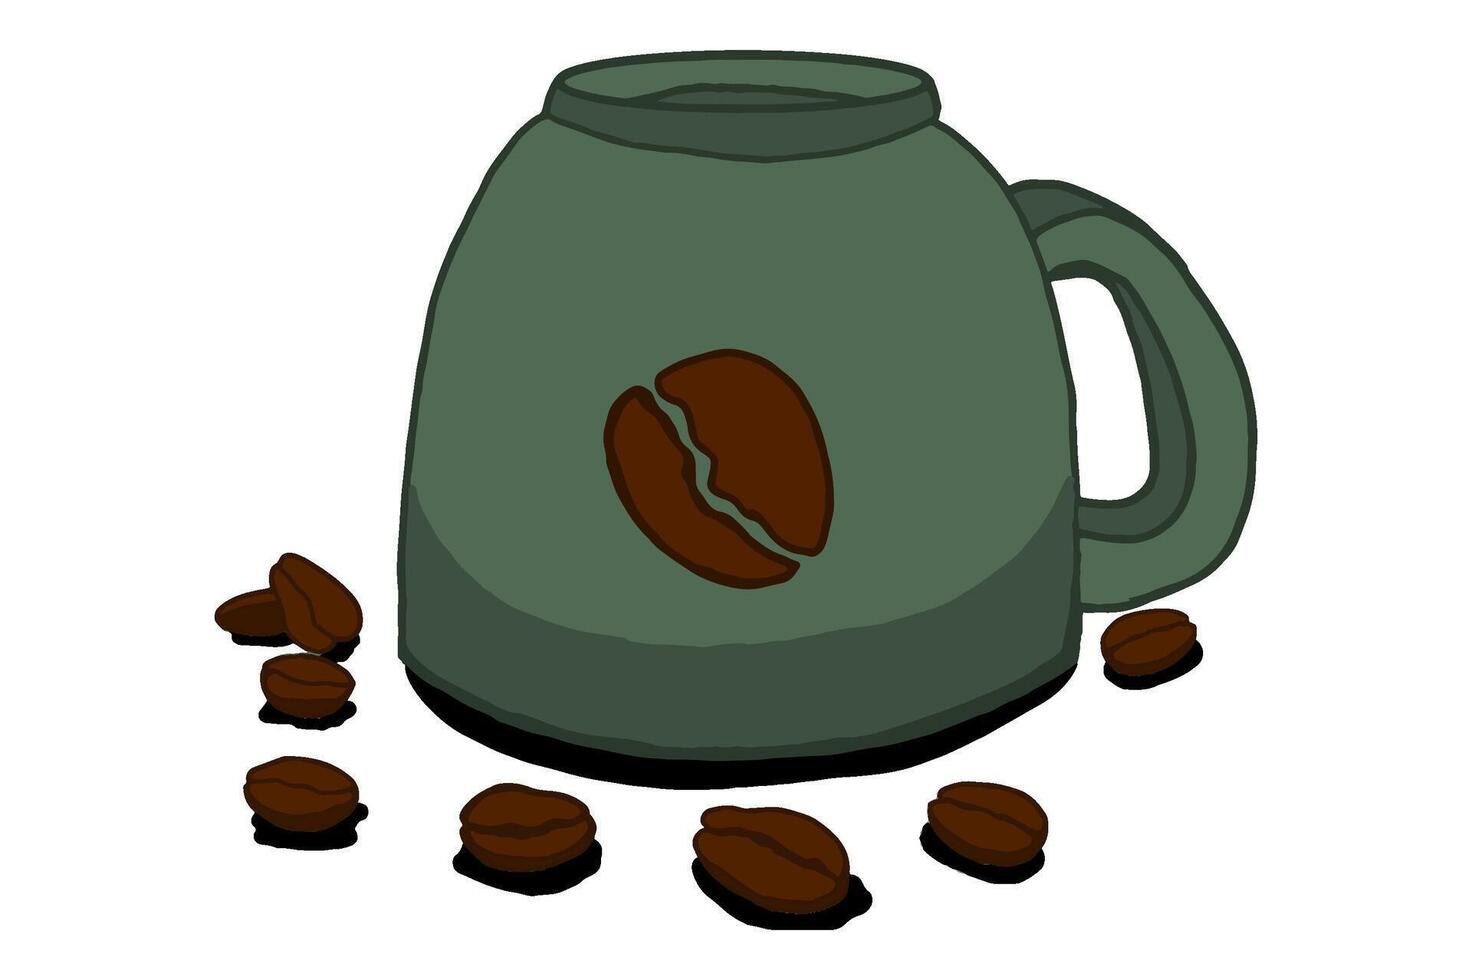 A Cup and Coffee Bean Vector